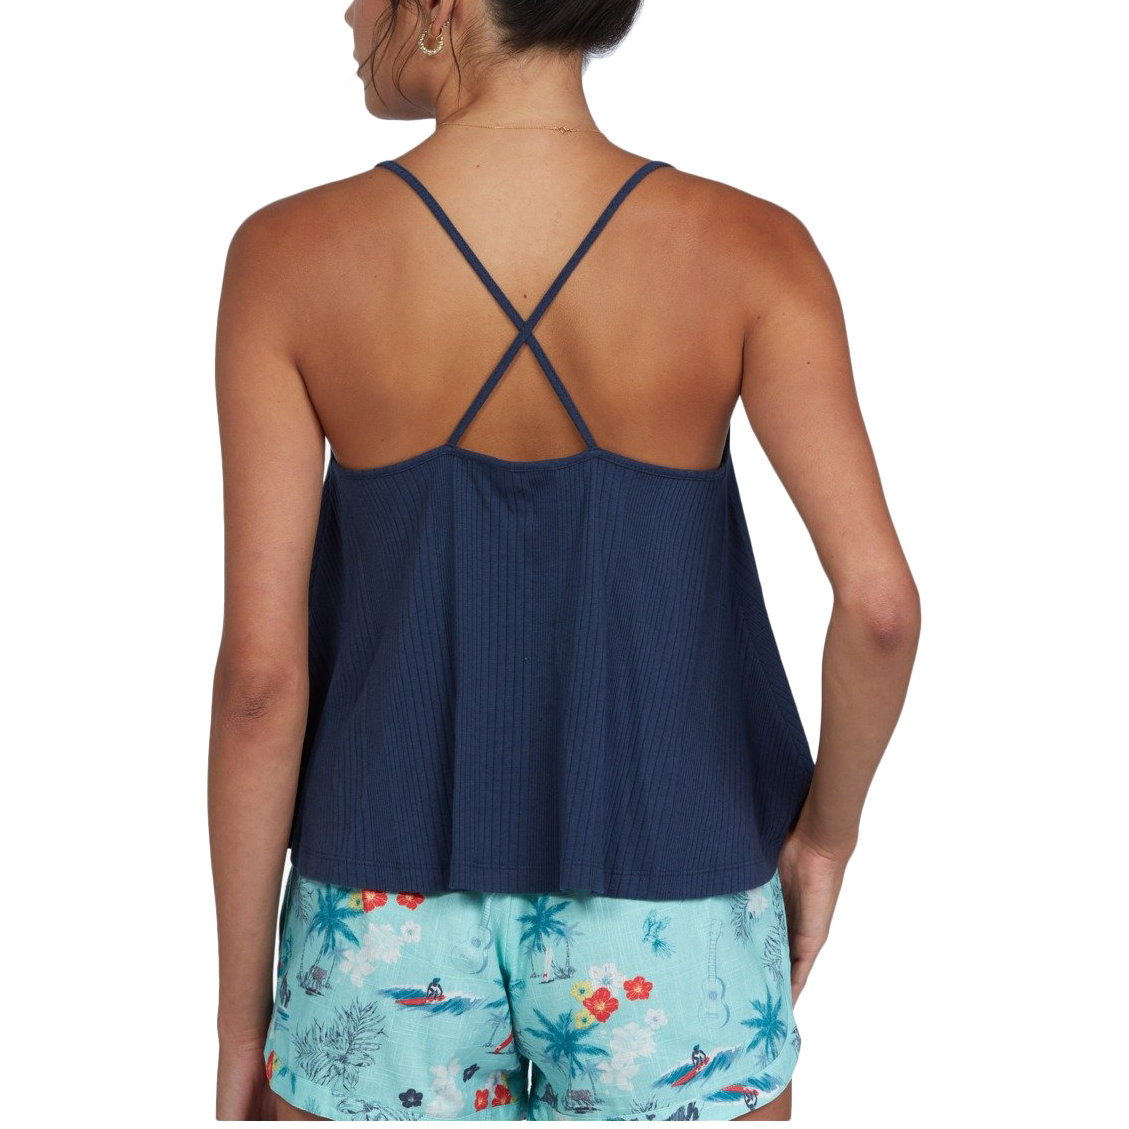 Women's Happy Thoughts Strappy Top alternate view